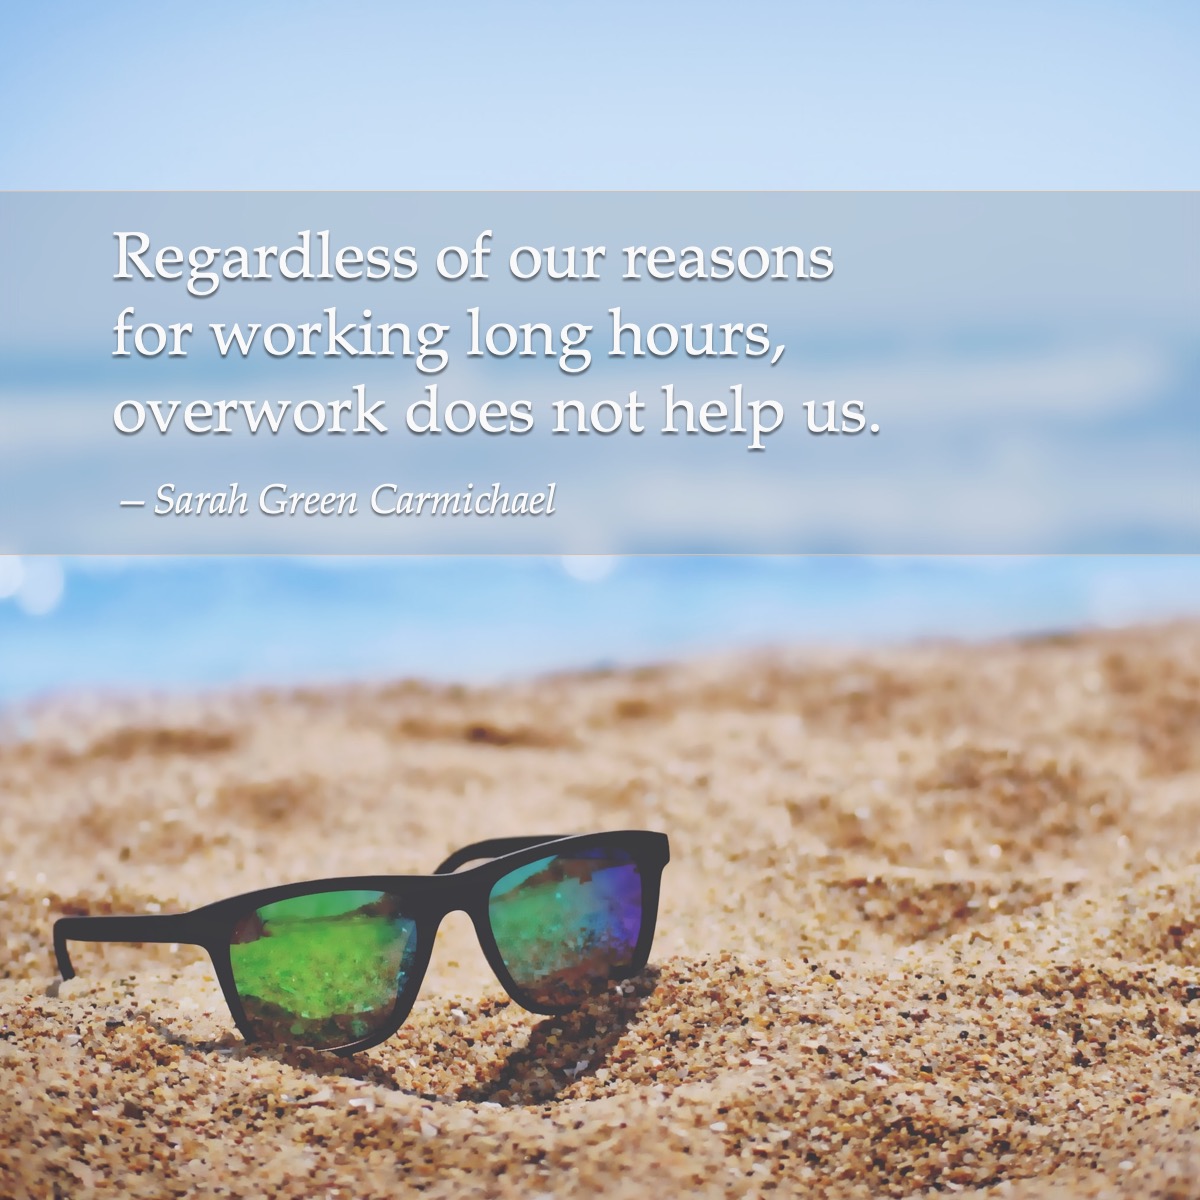 Regardless of our reasons for working long hours, overwork does not help us. —Sarah Green Carmichael